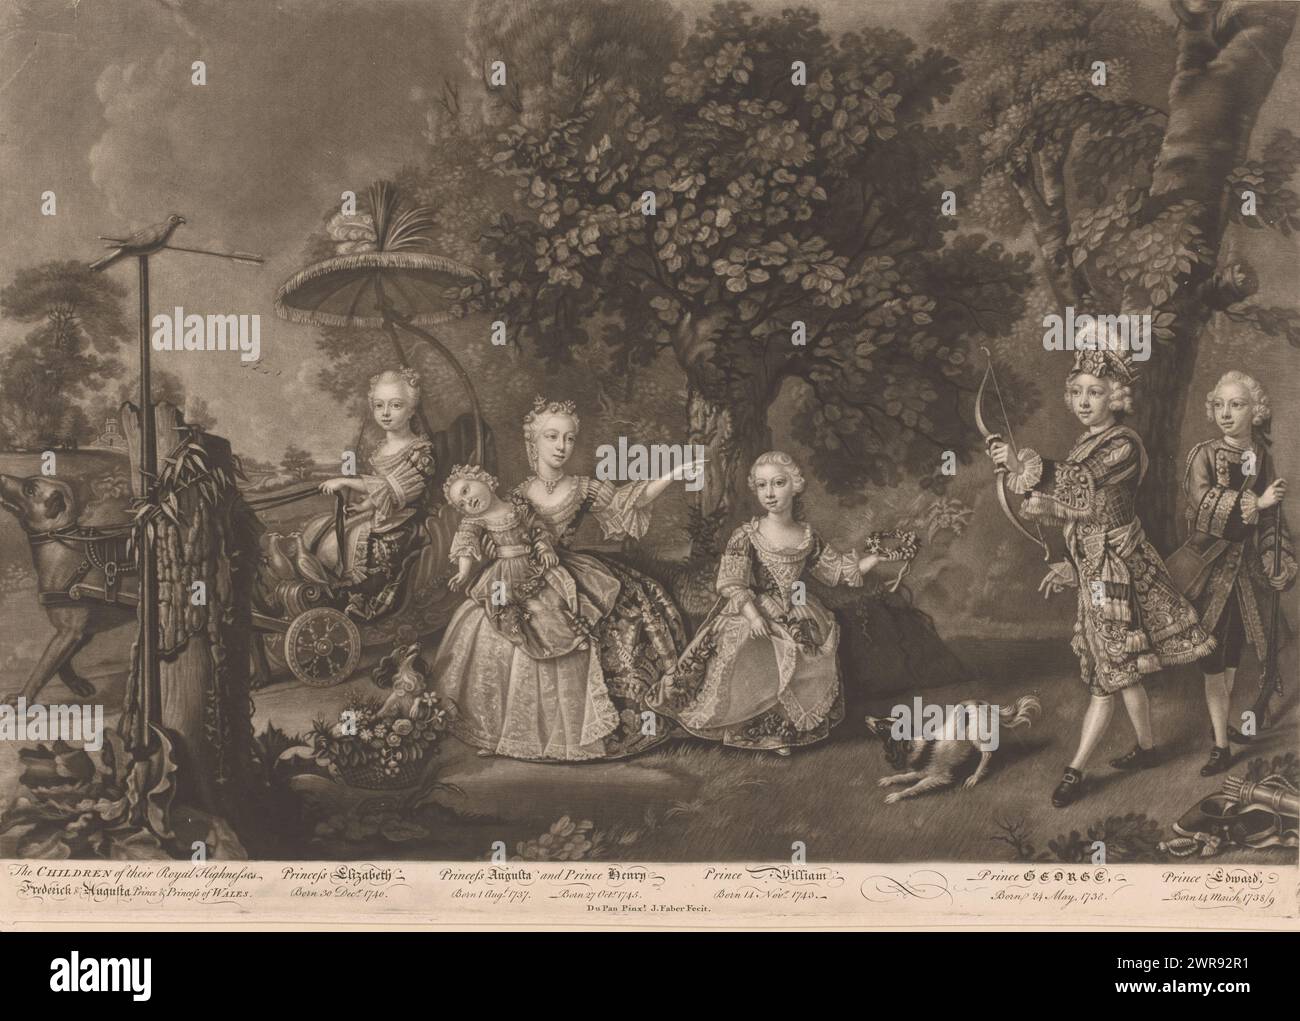 Portrait of Elisabeth Carolina, Princess of Wales, Augusta Frederick of Hanover, Henry Frederick, Duke of Cumberland and Strathearn, William Frederick of Gloucester, George III, King of England, and Edward of York, The Children of their Royal Highnesses / Frederick & Augusta Prince & Princess of Wales (title on object), The children of Frederick of Wales and Augusta of Saxe-Gotha at a young age., print maker: John Faber (II), after painting by: Barthélemy Dupan, 1745 - 1756, paper, etching, height 353 mm × width 502 mm, print Stock Photo